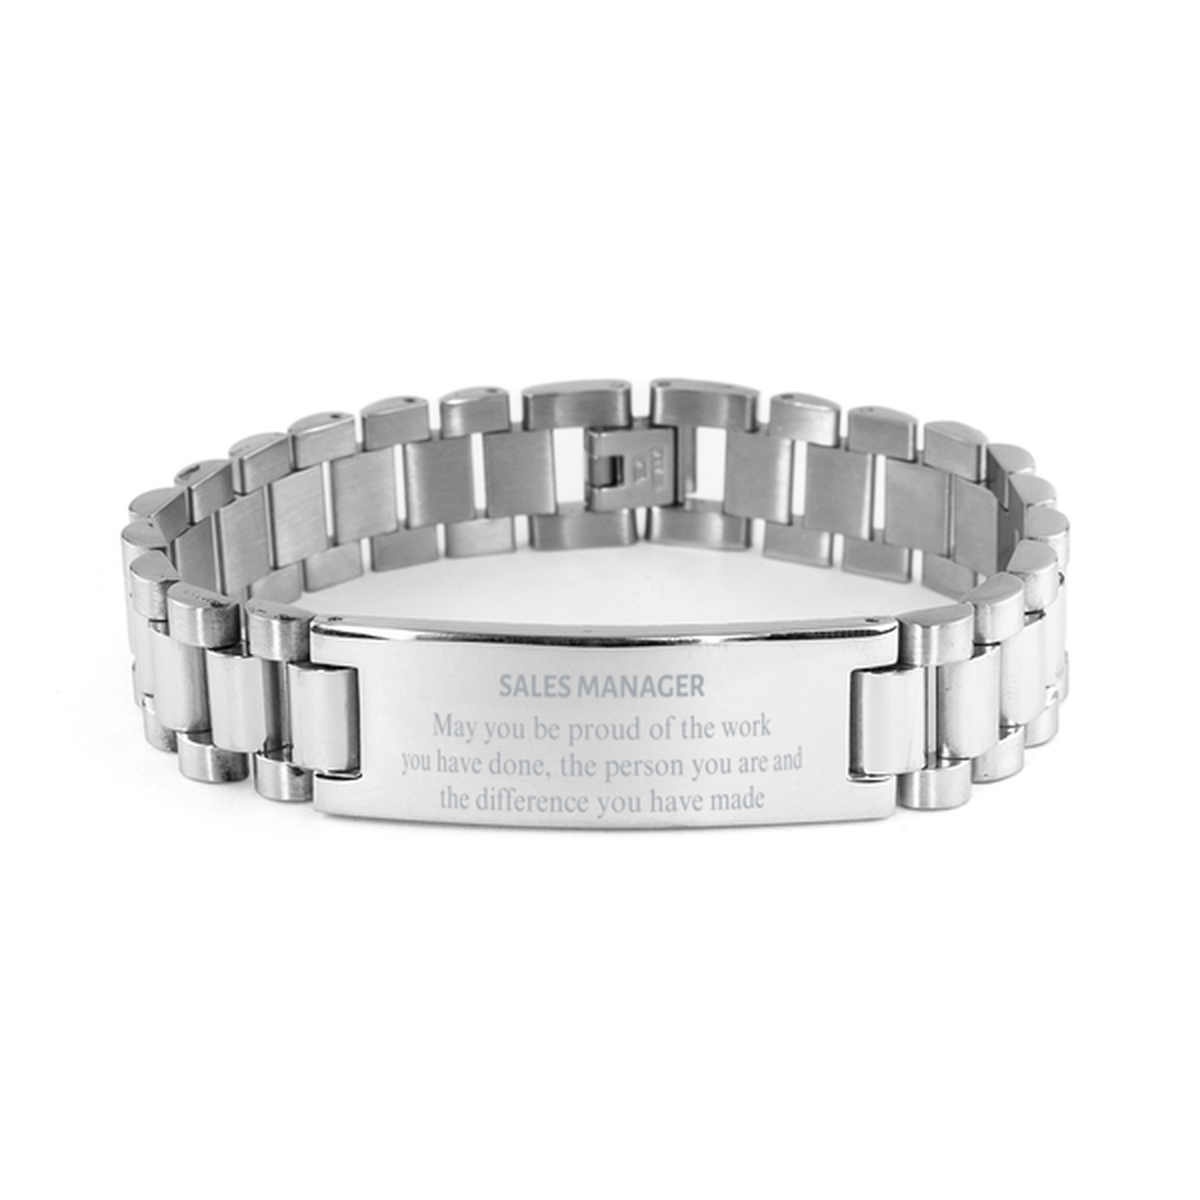 Sales Manager May you be proud of the work you have done, Retirement Sales Manager Ladder Stainless Steel Bracelet for Colleague Appreciation Gifts Amazing for Sales Manager